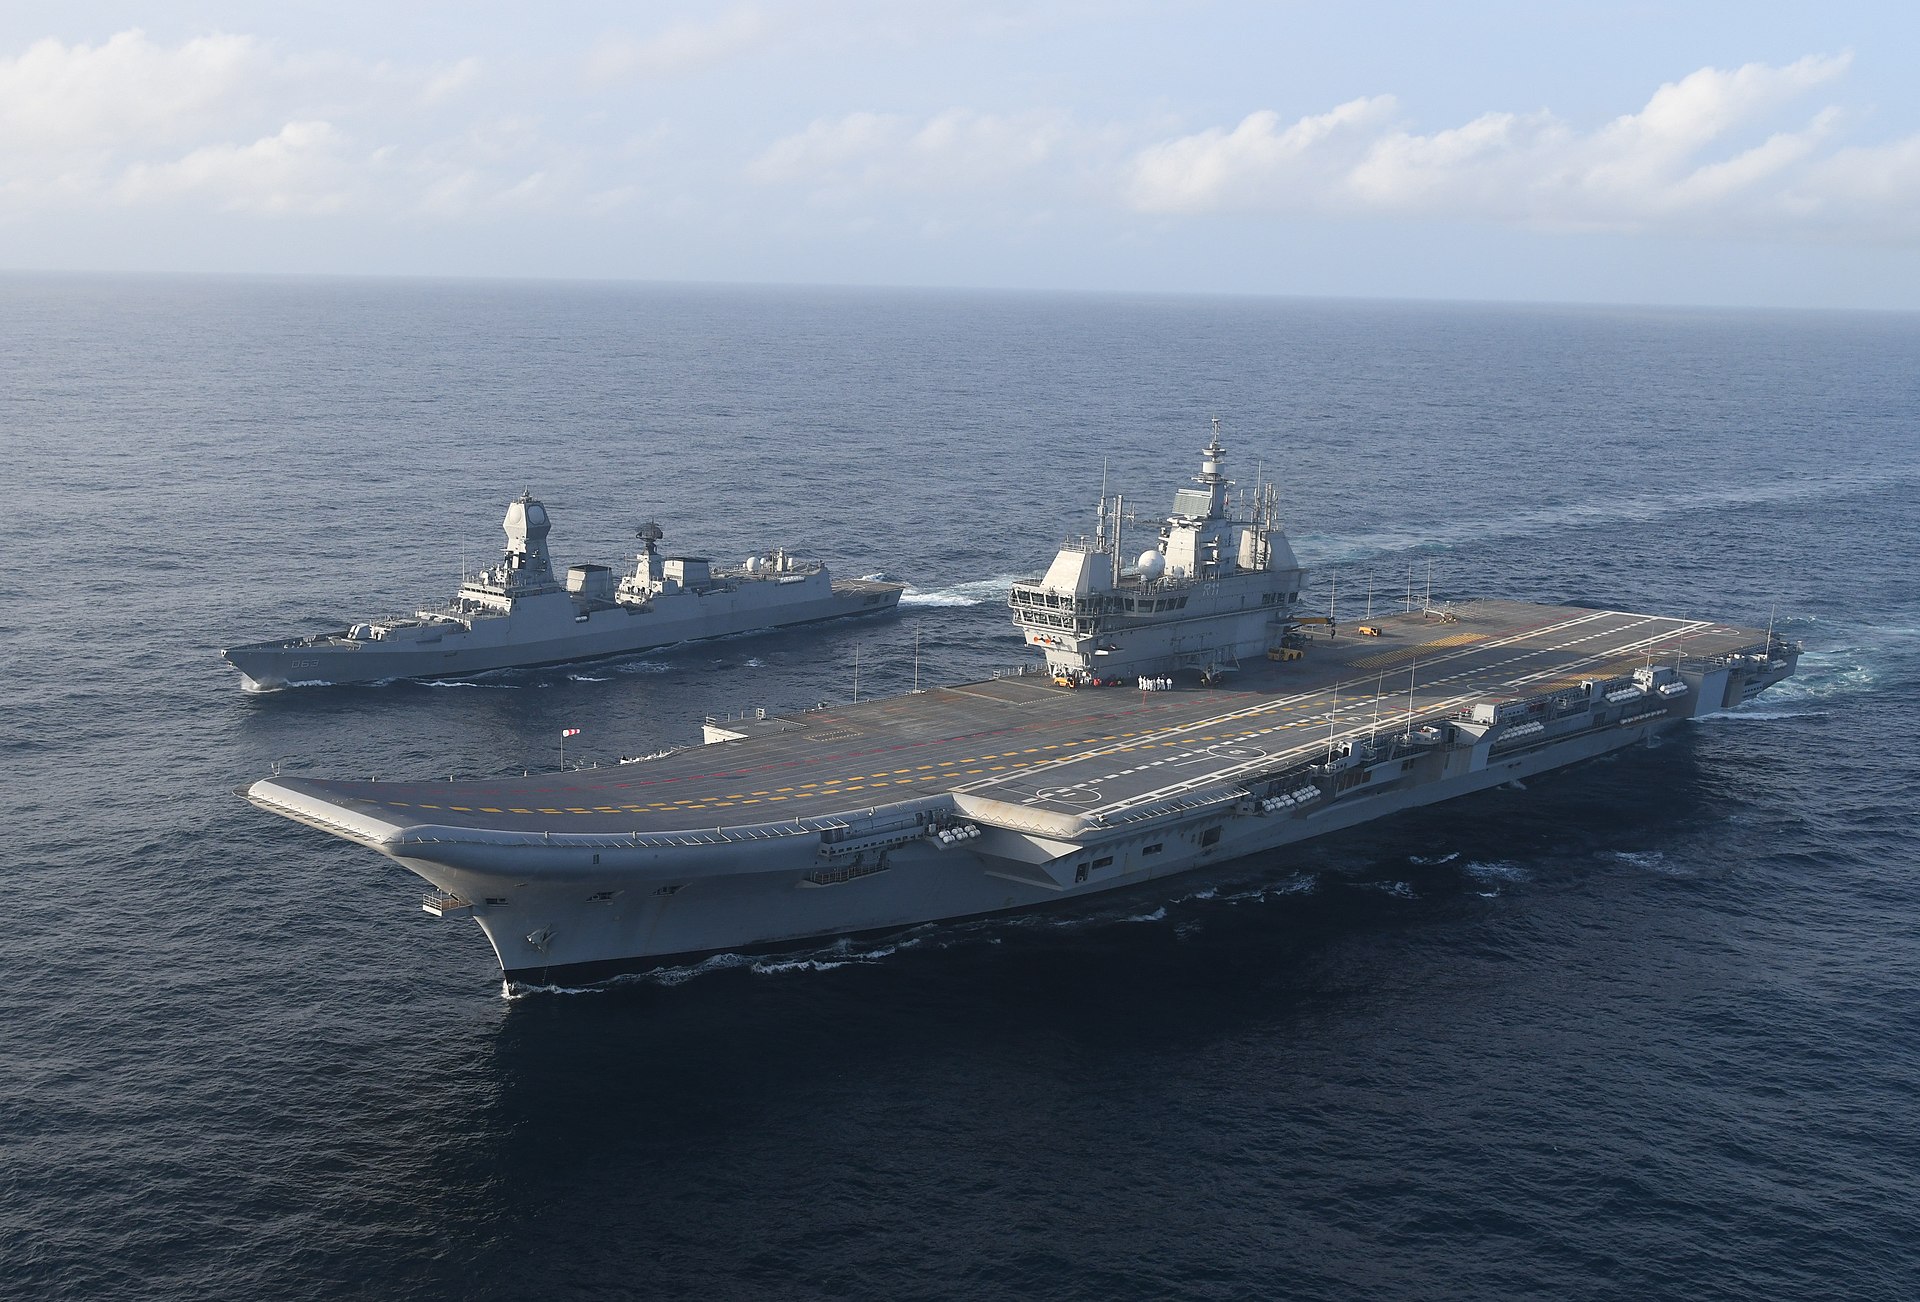 INS Vikrant, Commanding Officer: "India Needs More Aircraft Carriers"